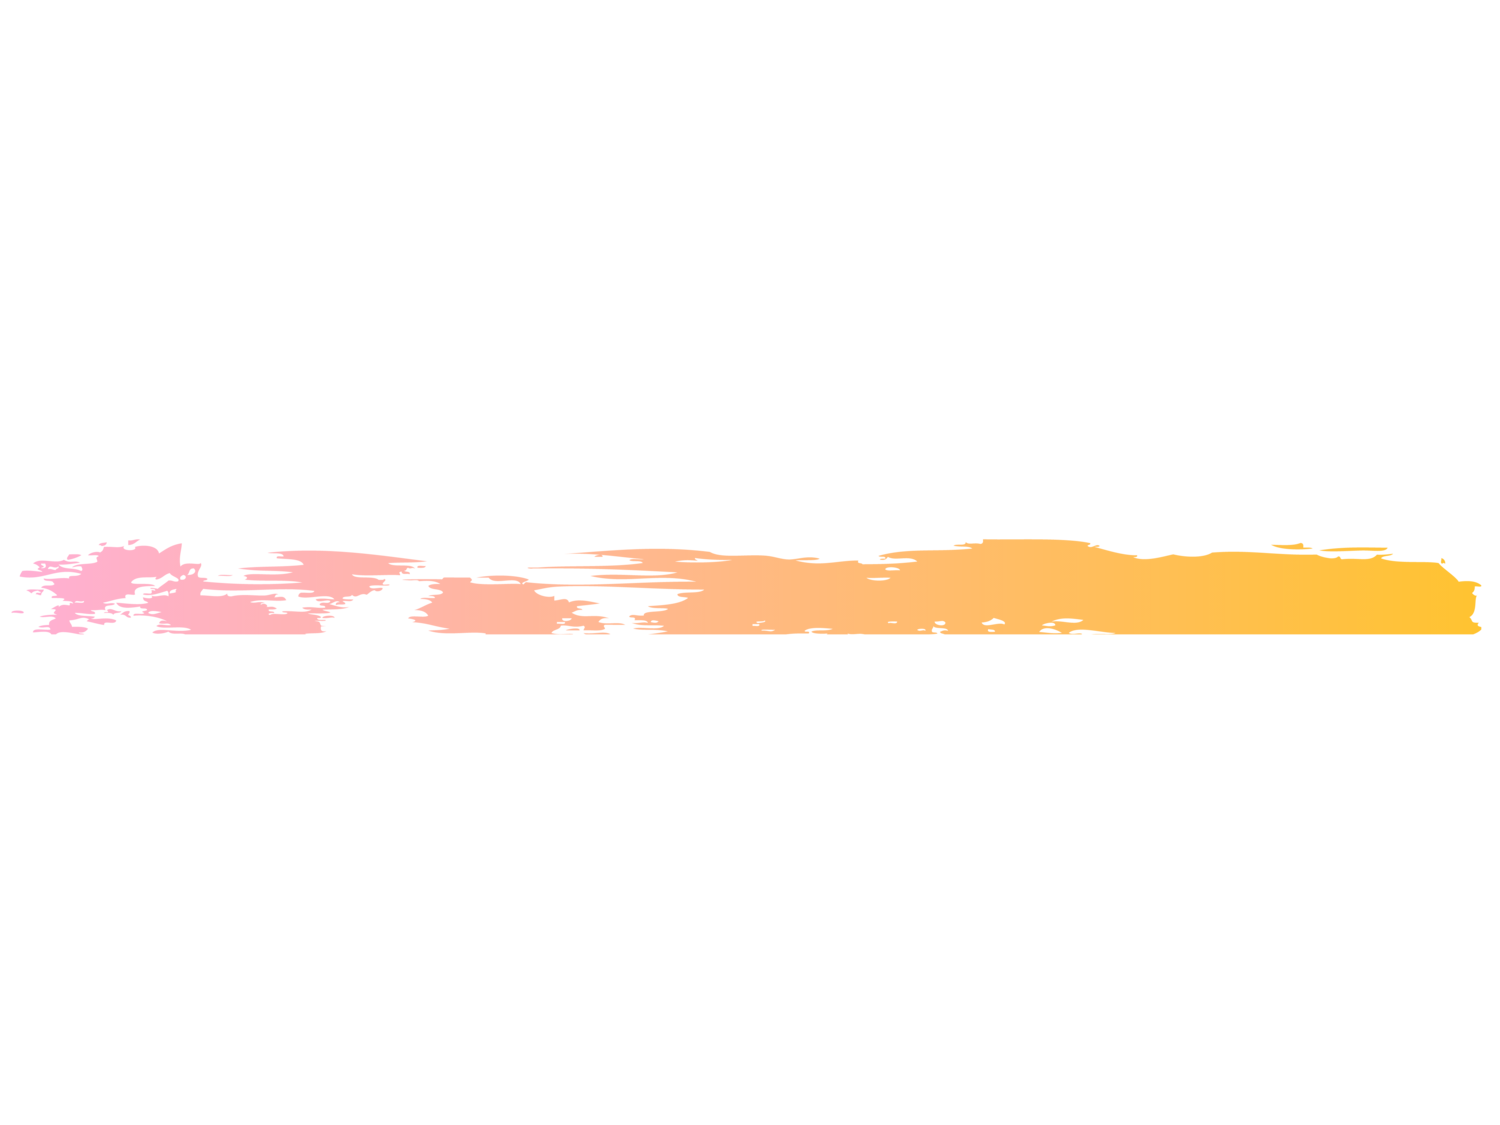 Dr. Rosa Wu Counselling and Psychotherapy Services